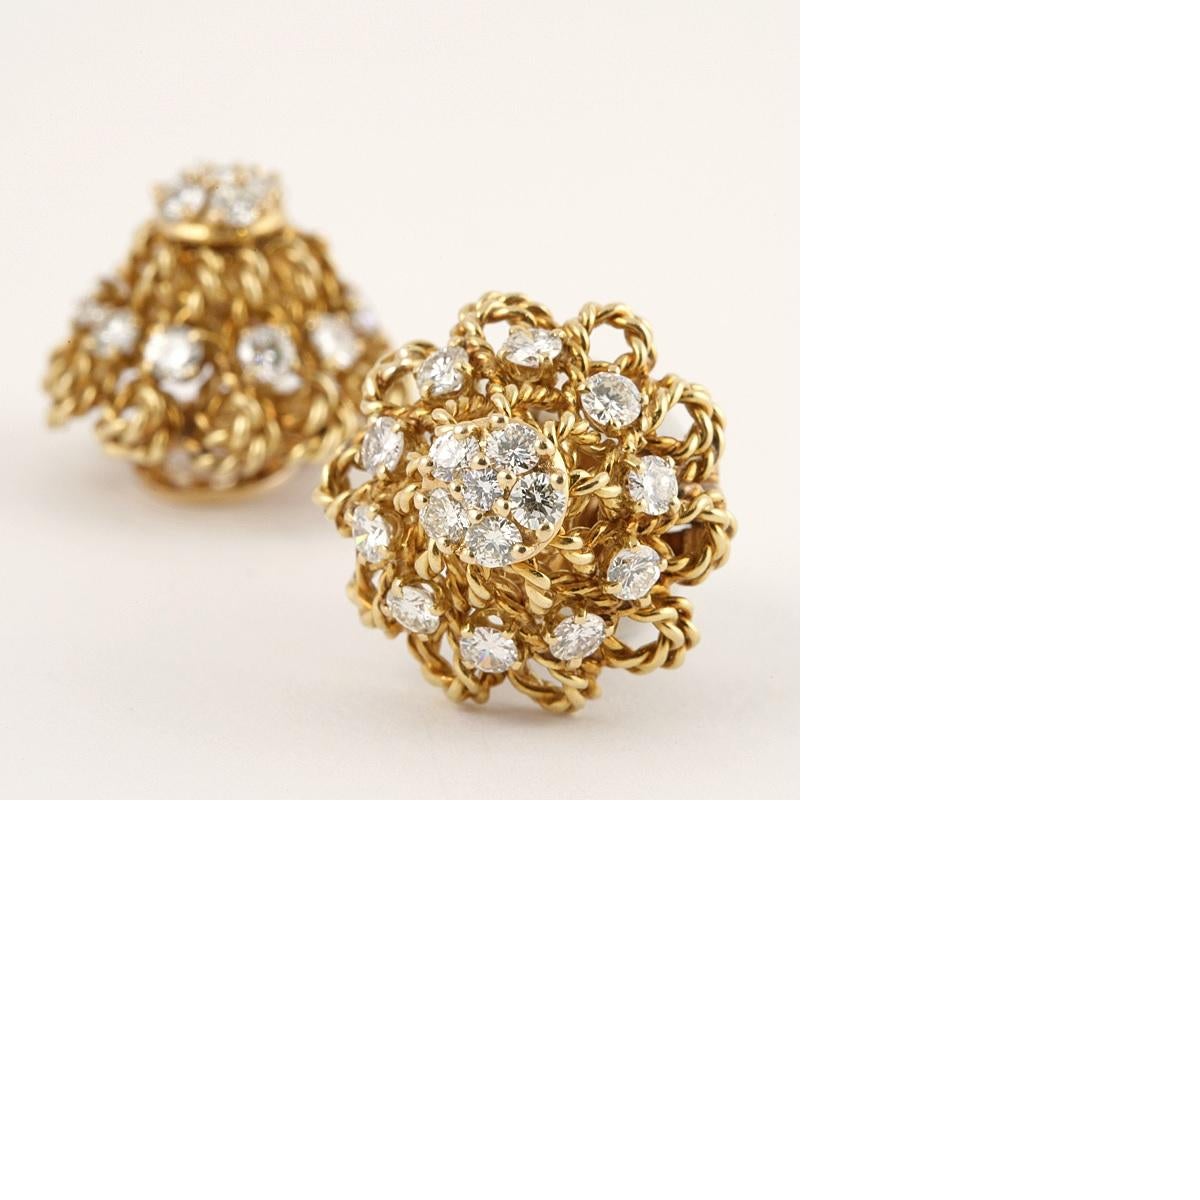 Marianne Ostier Mid-20th Century Diamond Gold Earrings In Excellent Condition For Sale In New York, NY